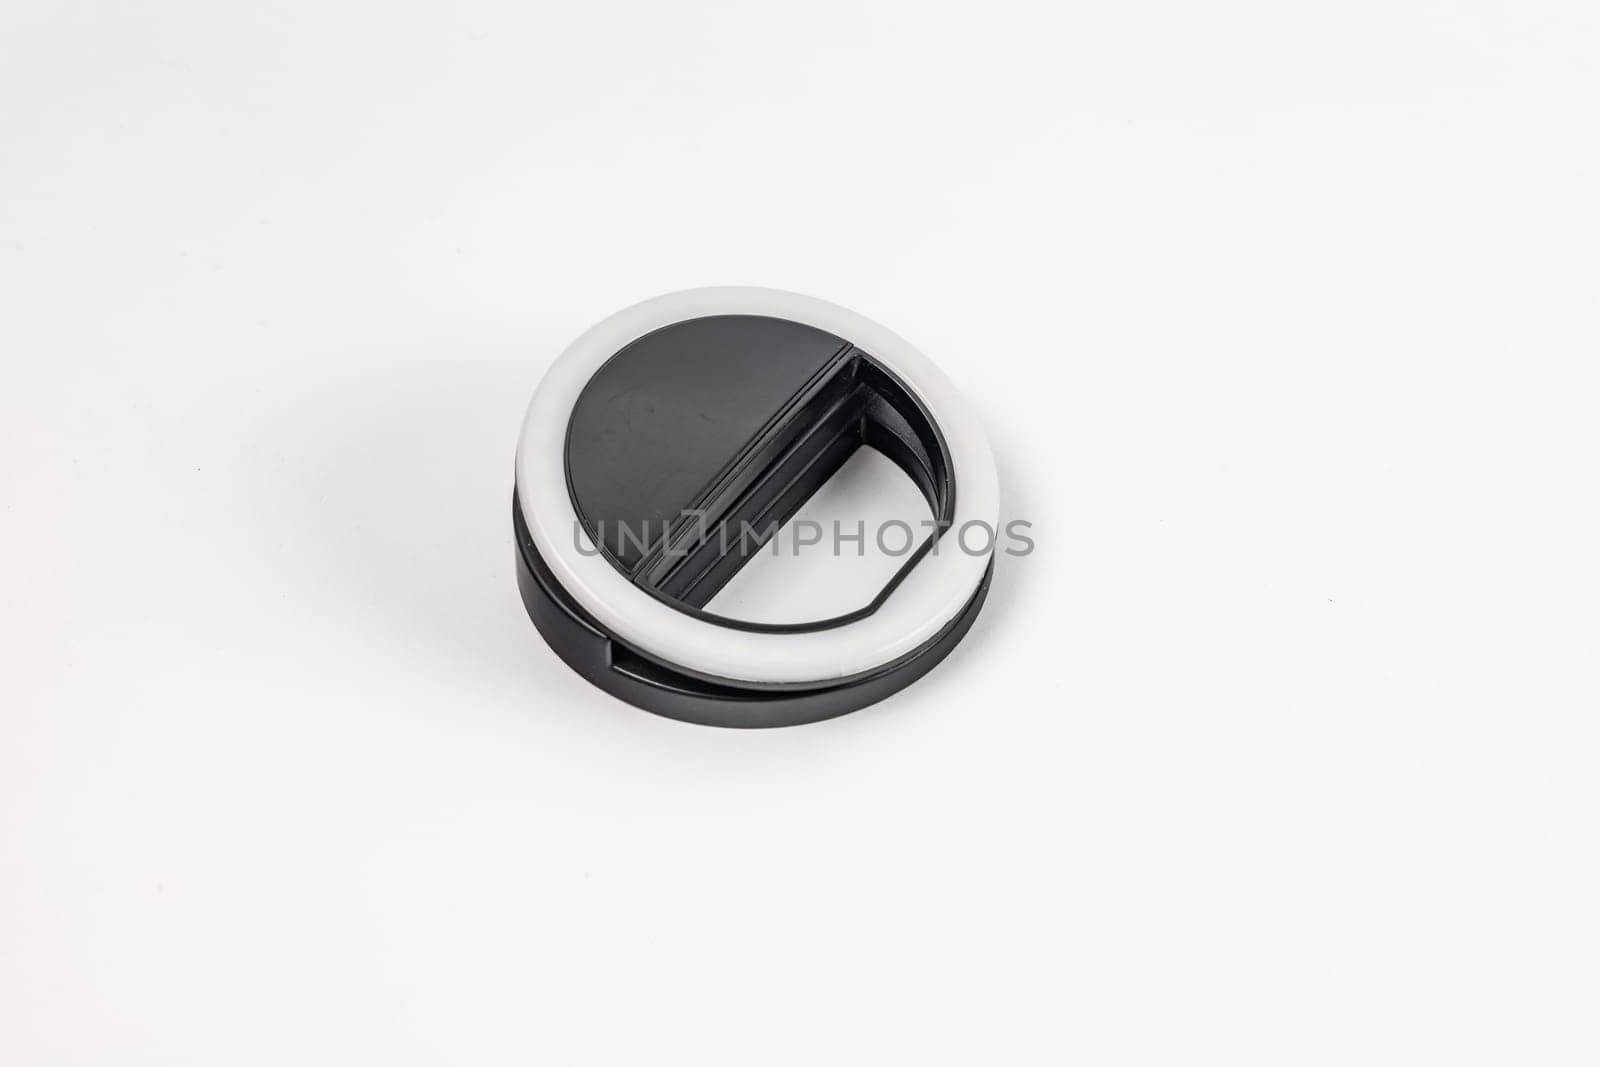 Small and portable LED ring light to attach on phone camera